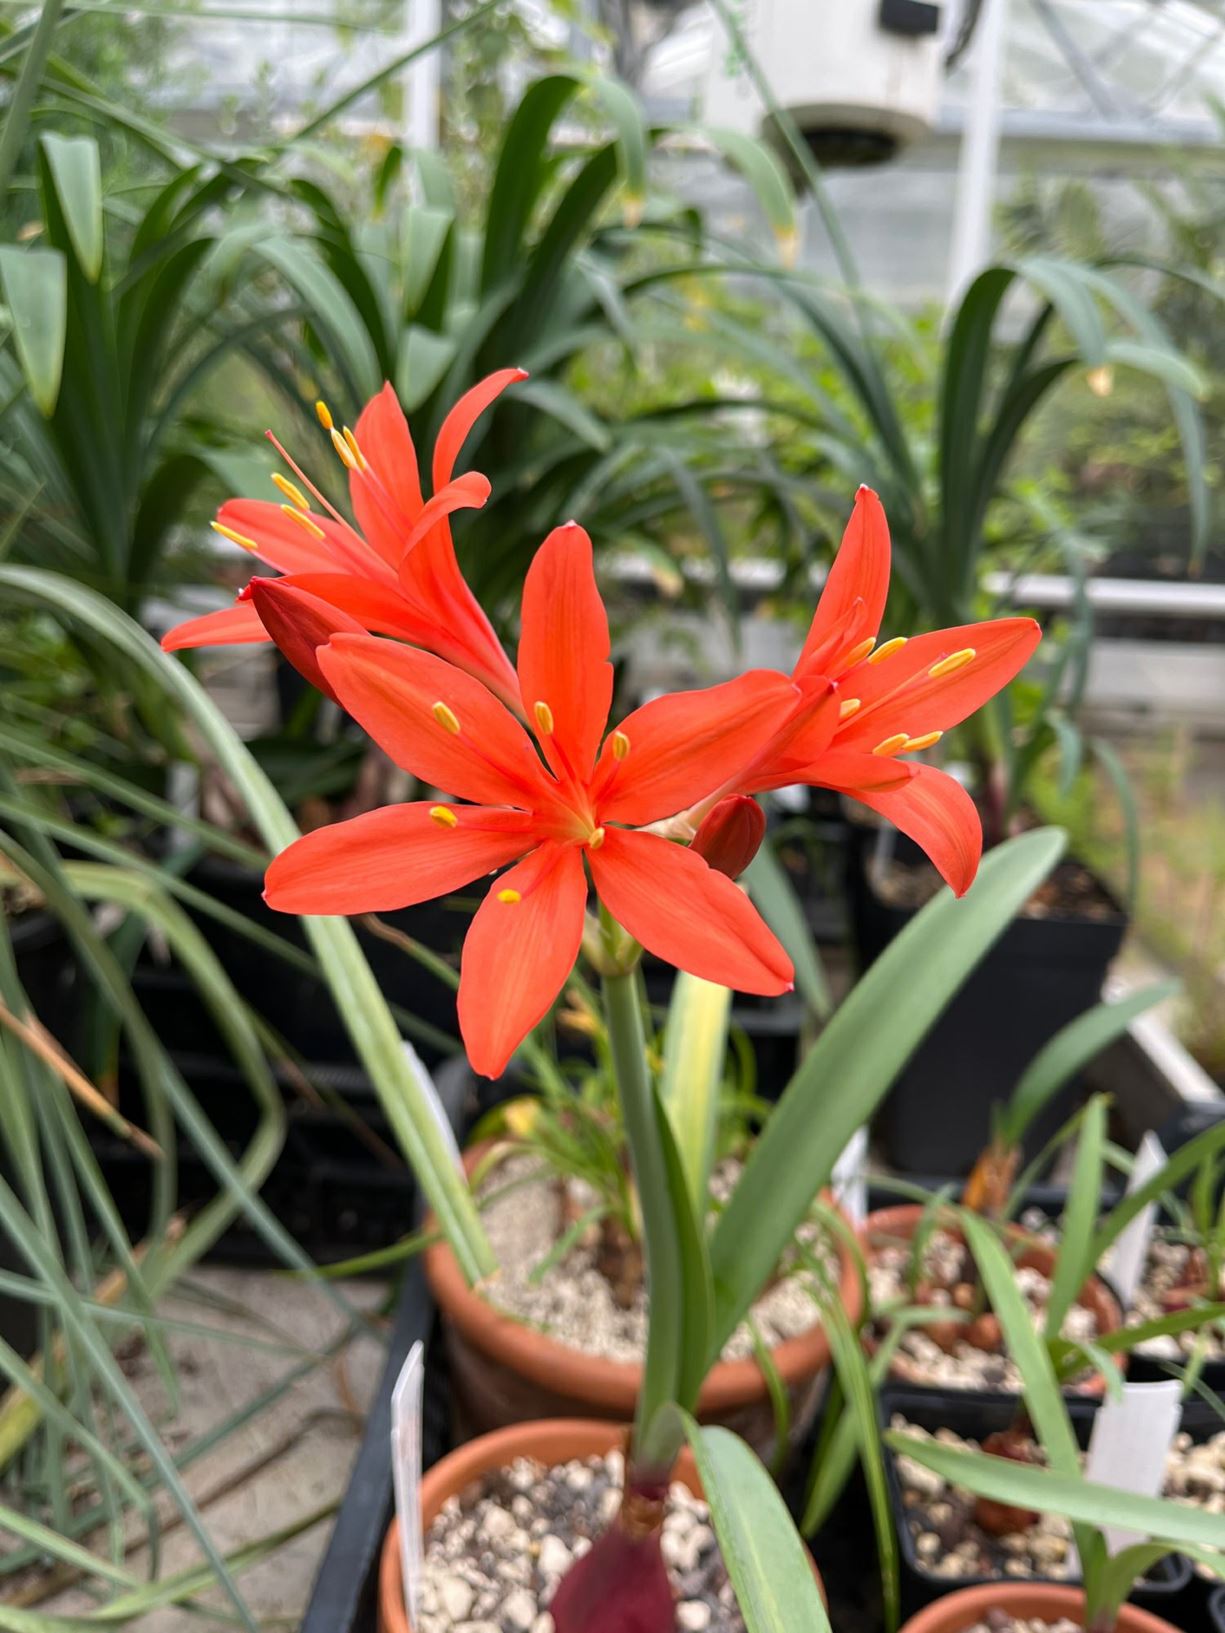 Cyrtanthus elatus - Berglelie, George lily, Jersey lily, Knysna lily, Pink George lily, Scarborough lily